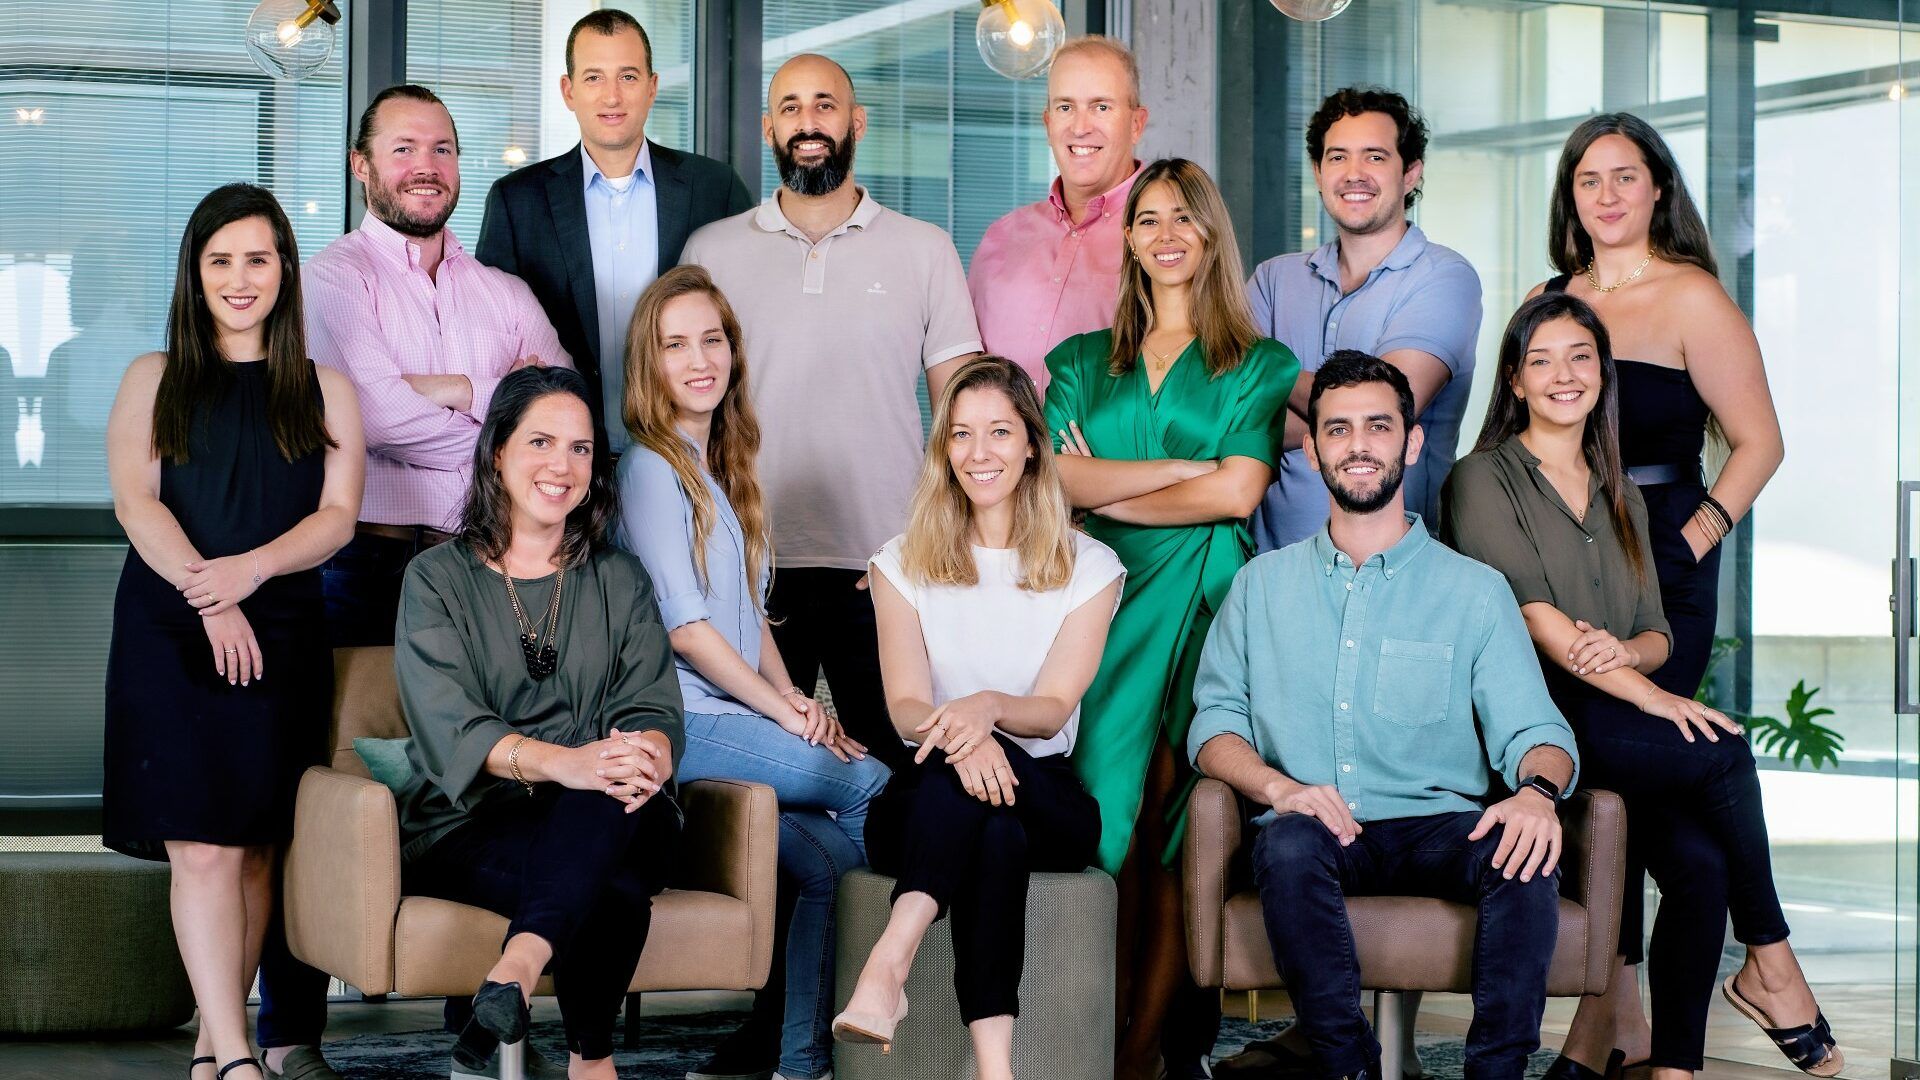 YL Ventures leads its portfolio companies’ seed rounds, investing at the earliest stages of a startup’s lifecycle and providing the preliminary resources and foundation necessary for a startup to focus on growth and longevity in the global market.